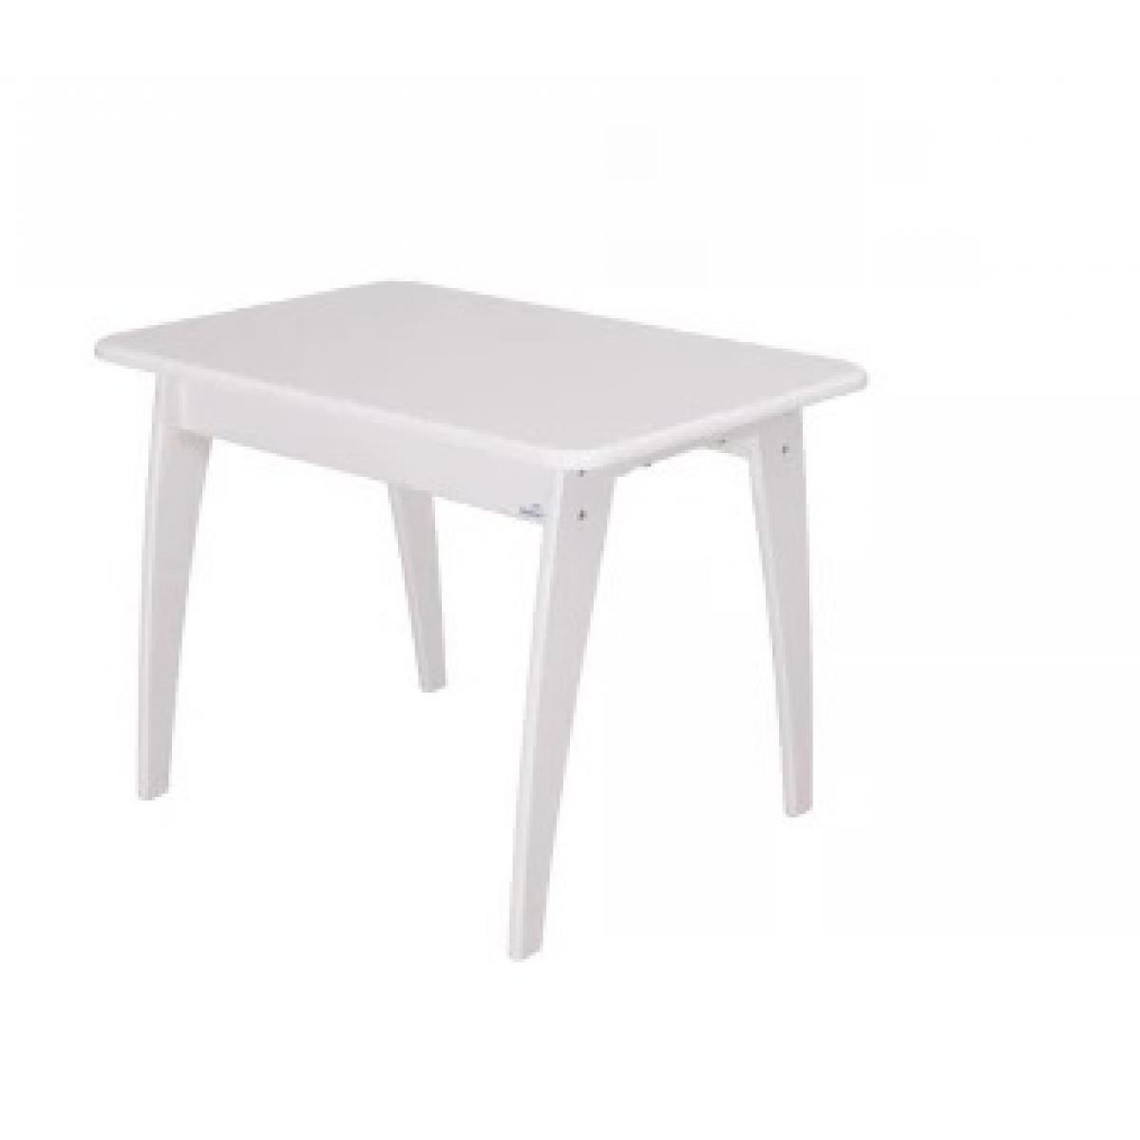 Geuther Geuther Table bois enfant BAMBINO Couleur Blanc